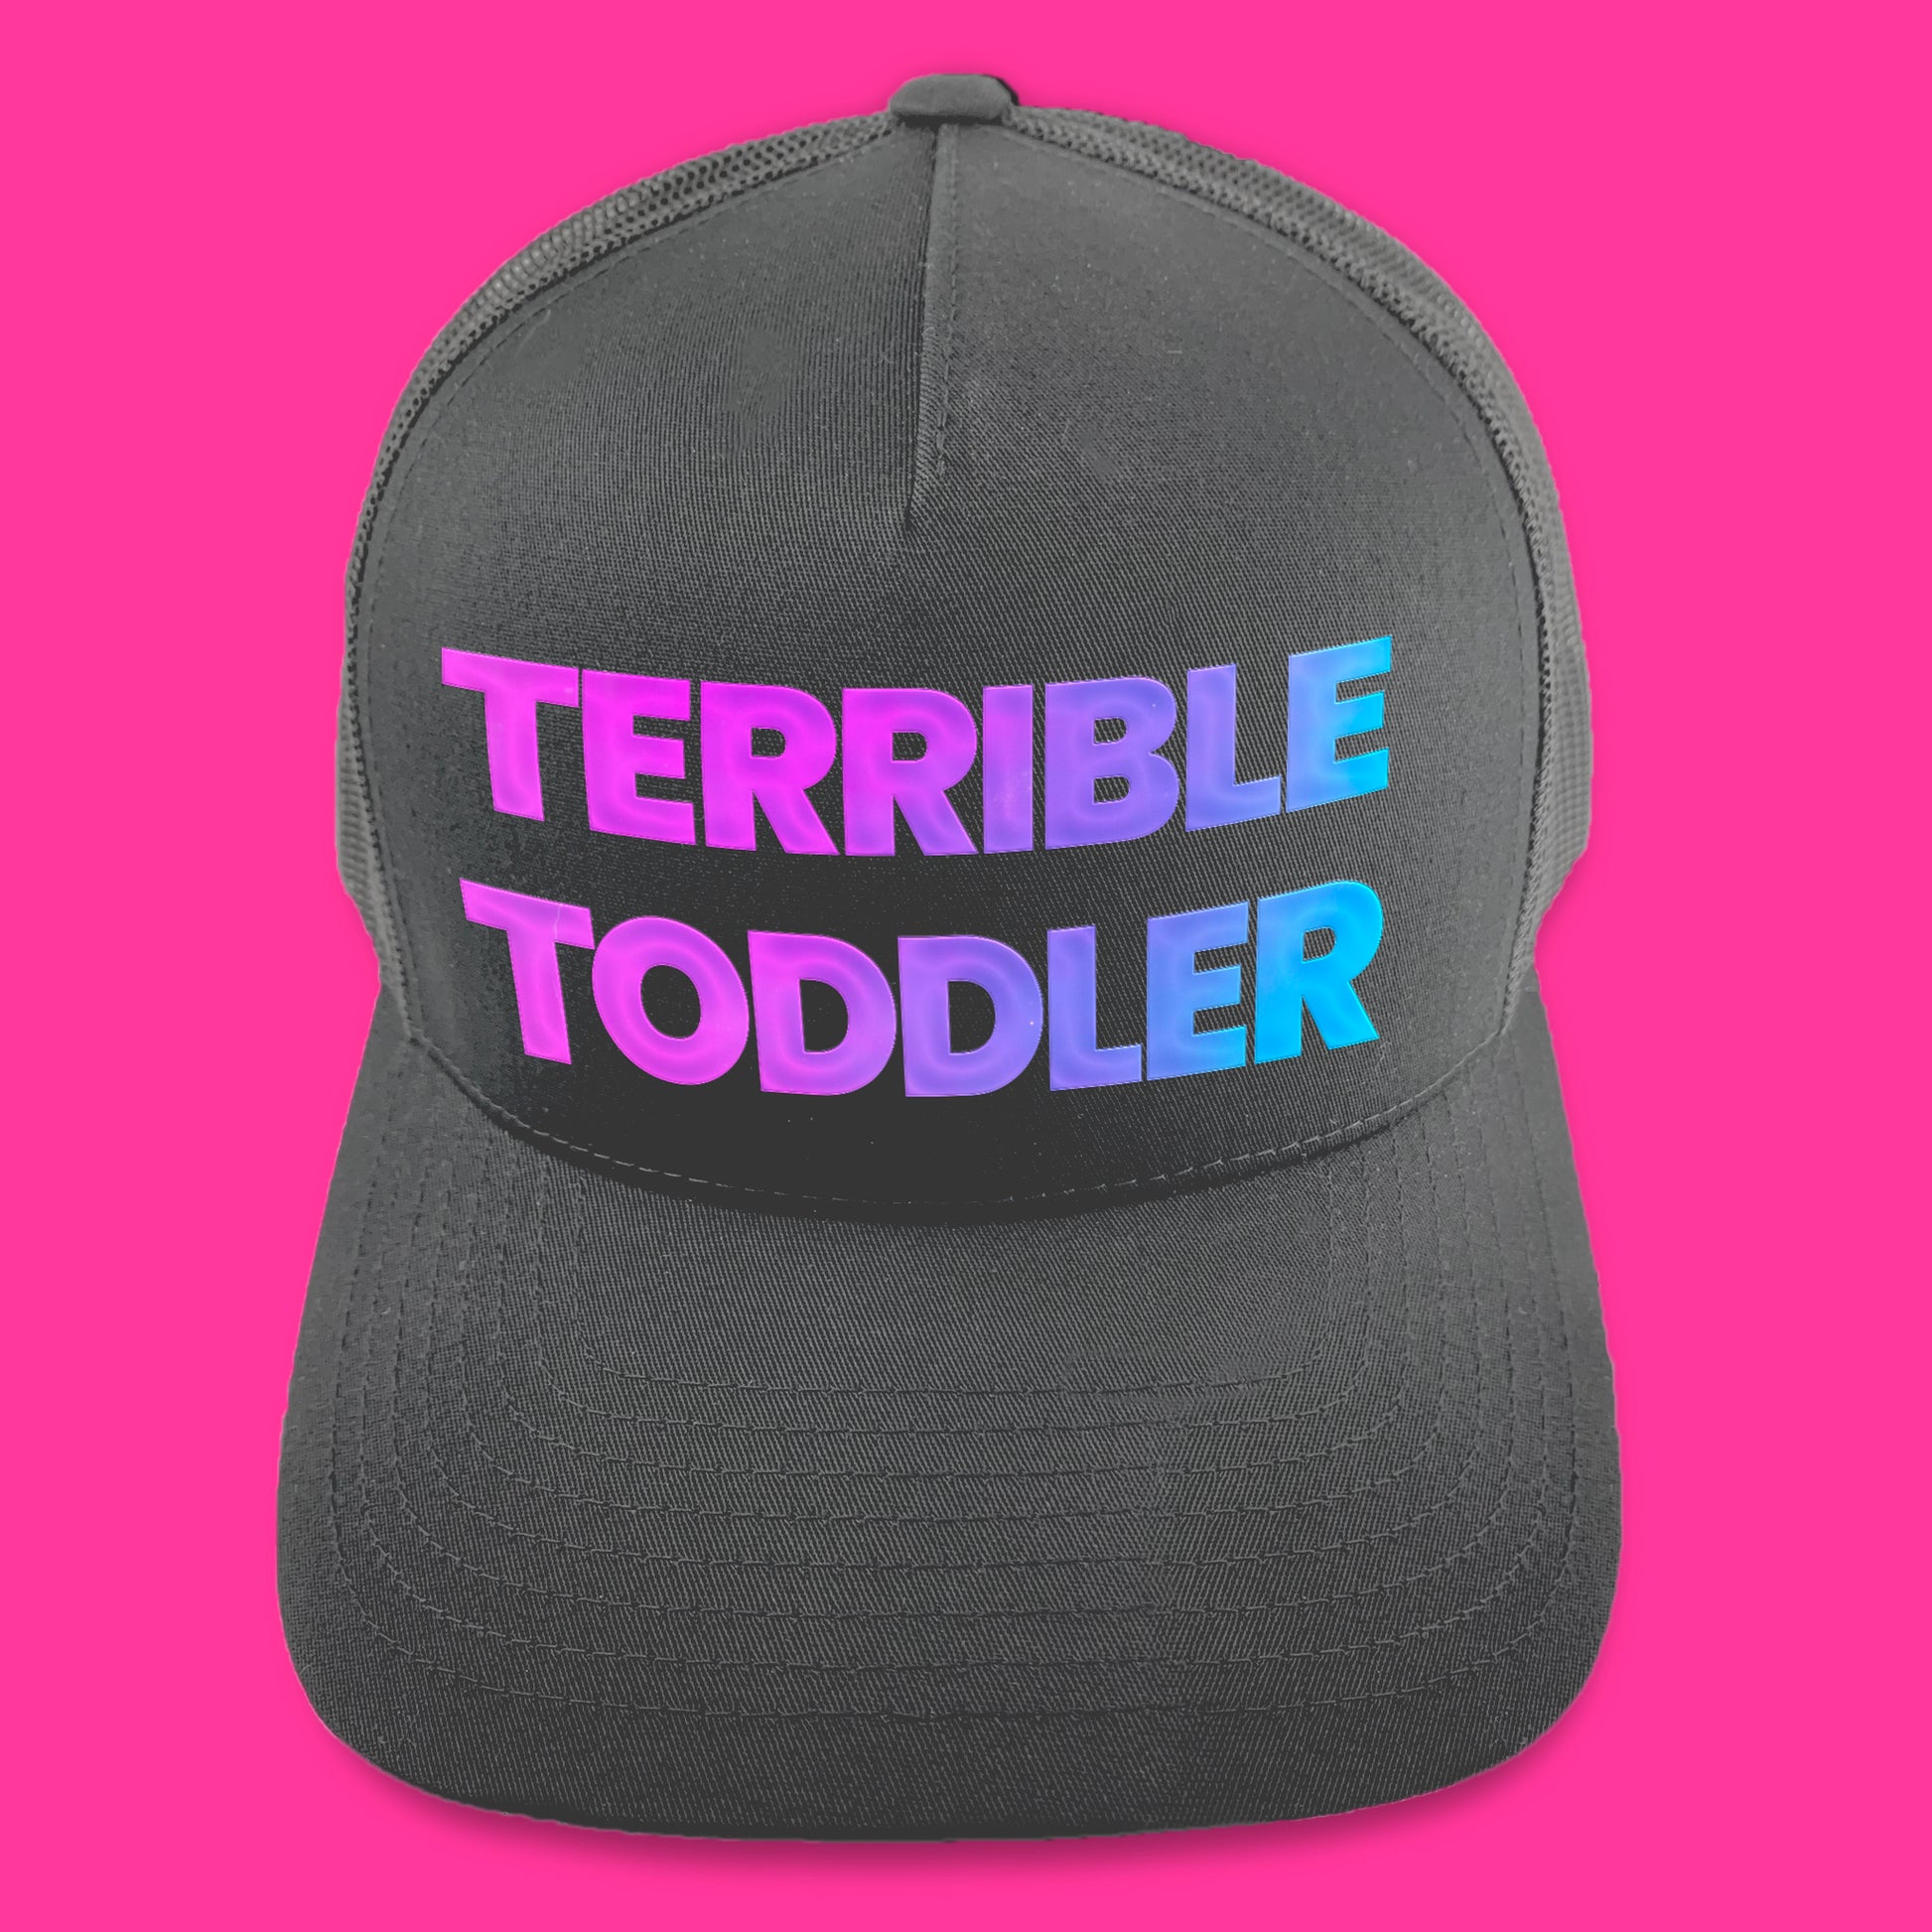 USE YOUR WORDS custom text snapback hat by Glitter Garage / BBJ - charcoal cap with bold text in your message - sample with "Terrible Toddler" text in holographic pearl